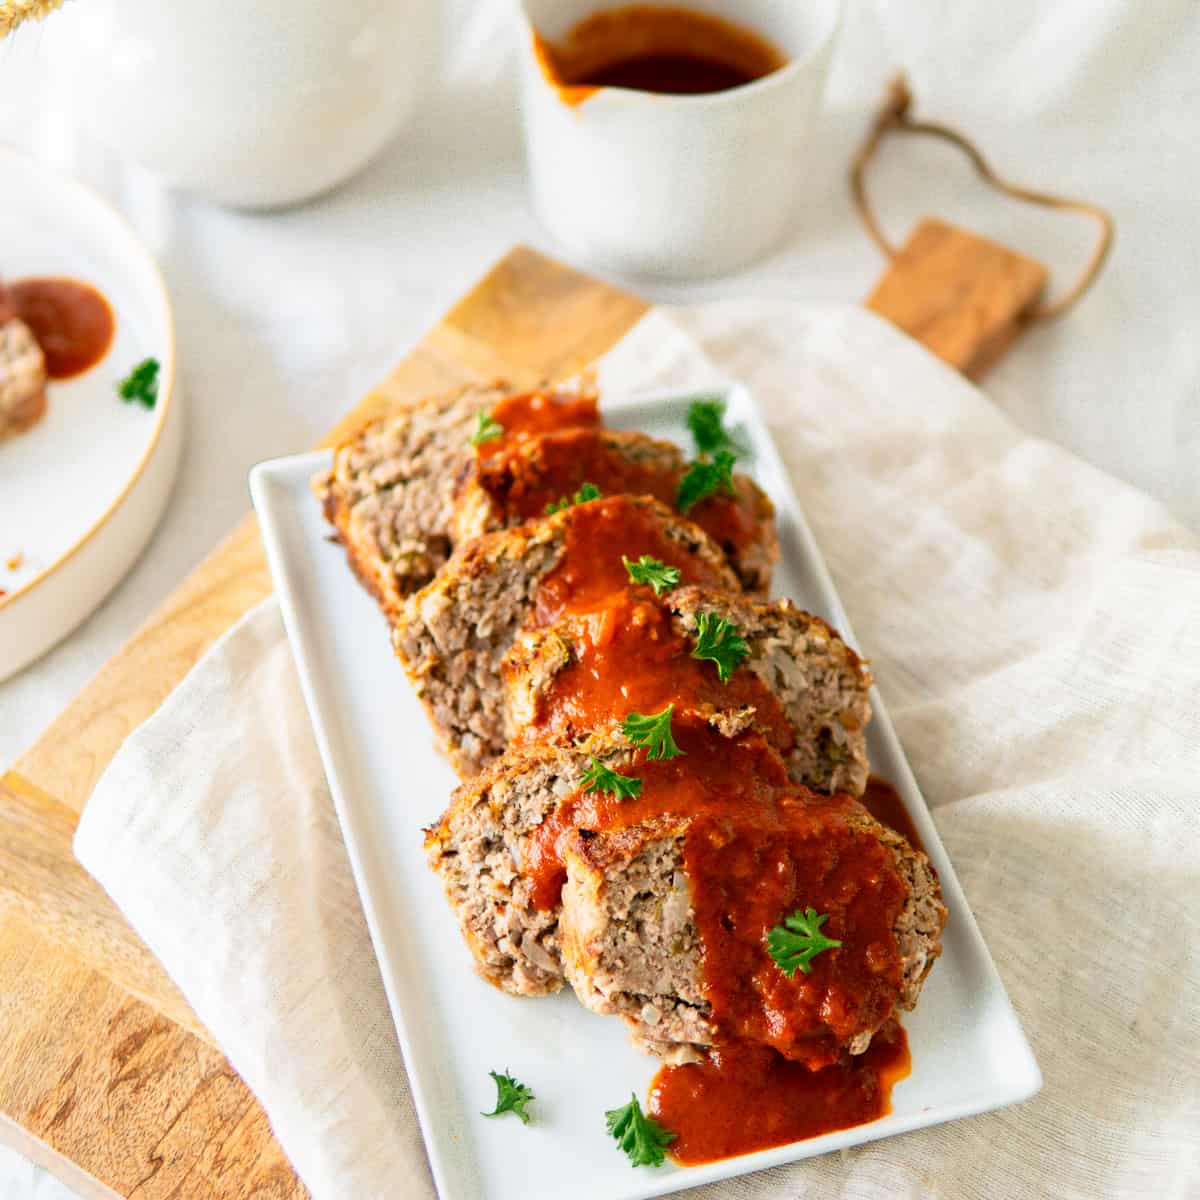 German meatloaf on a platter with sauce